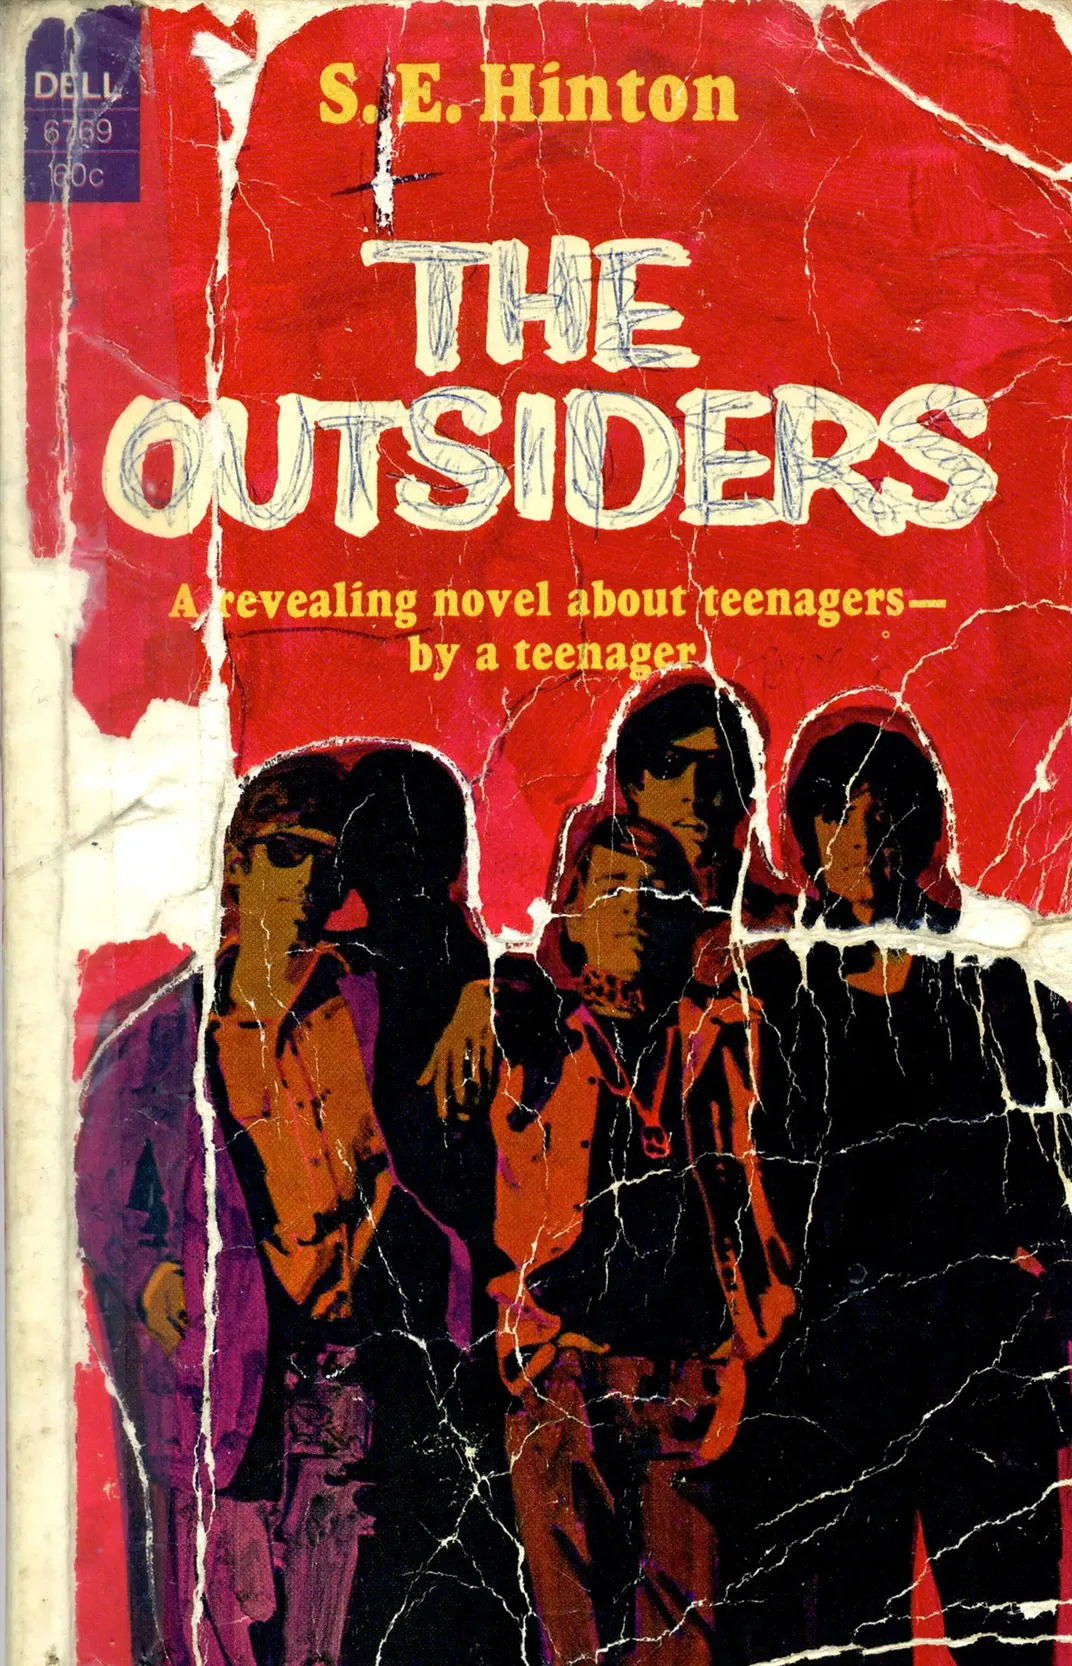 The original paperback cover of The Outsiders​​​​​​​